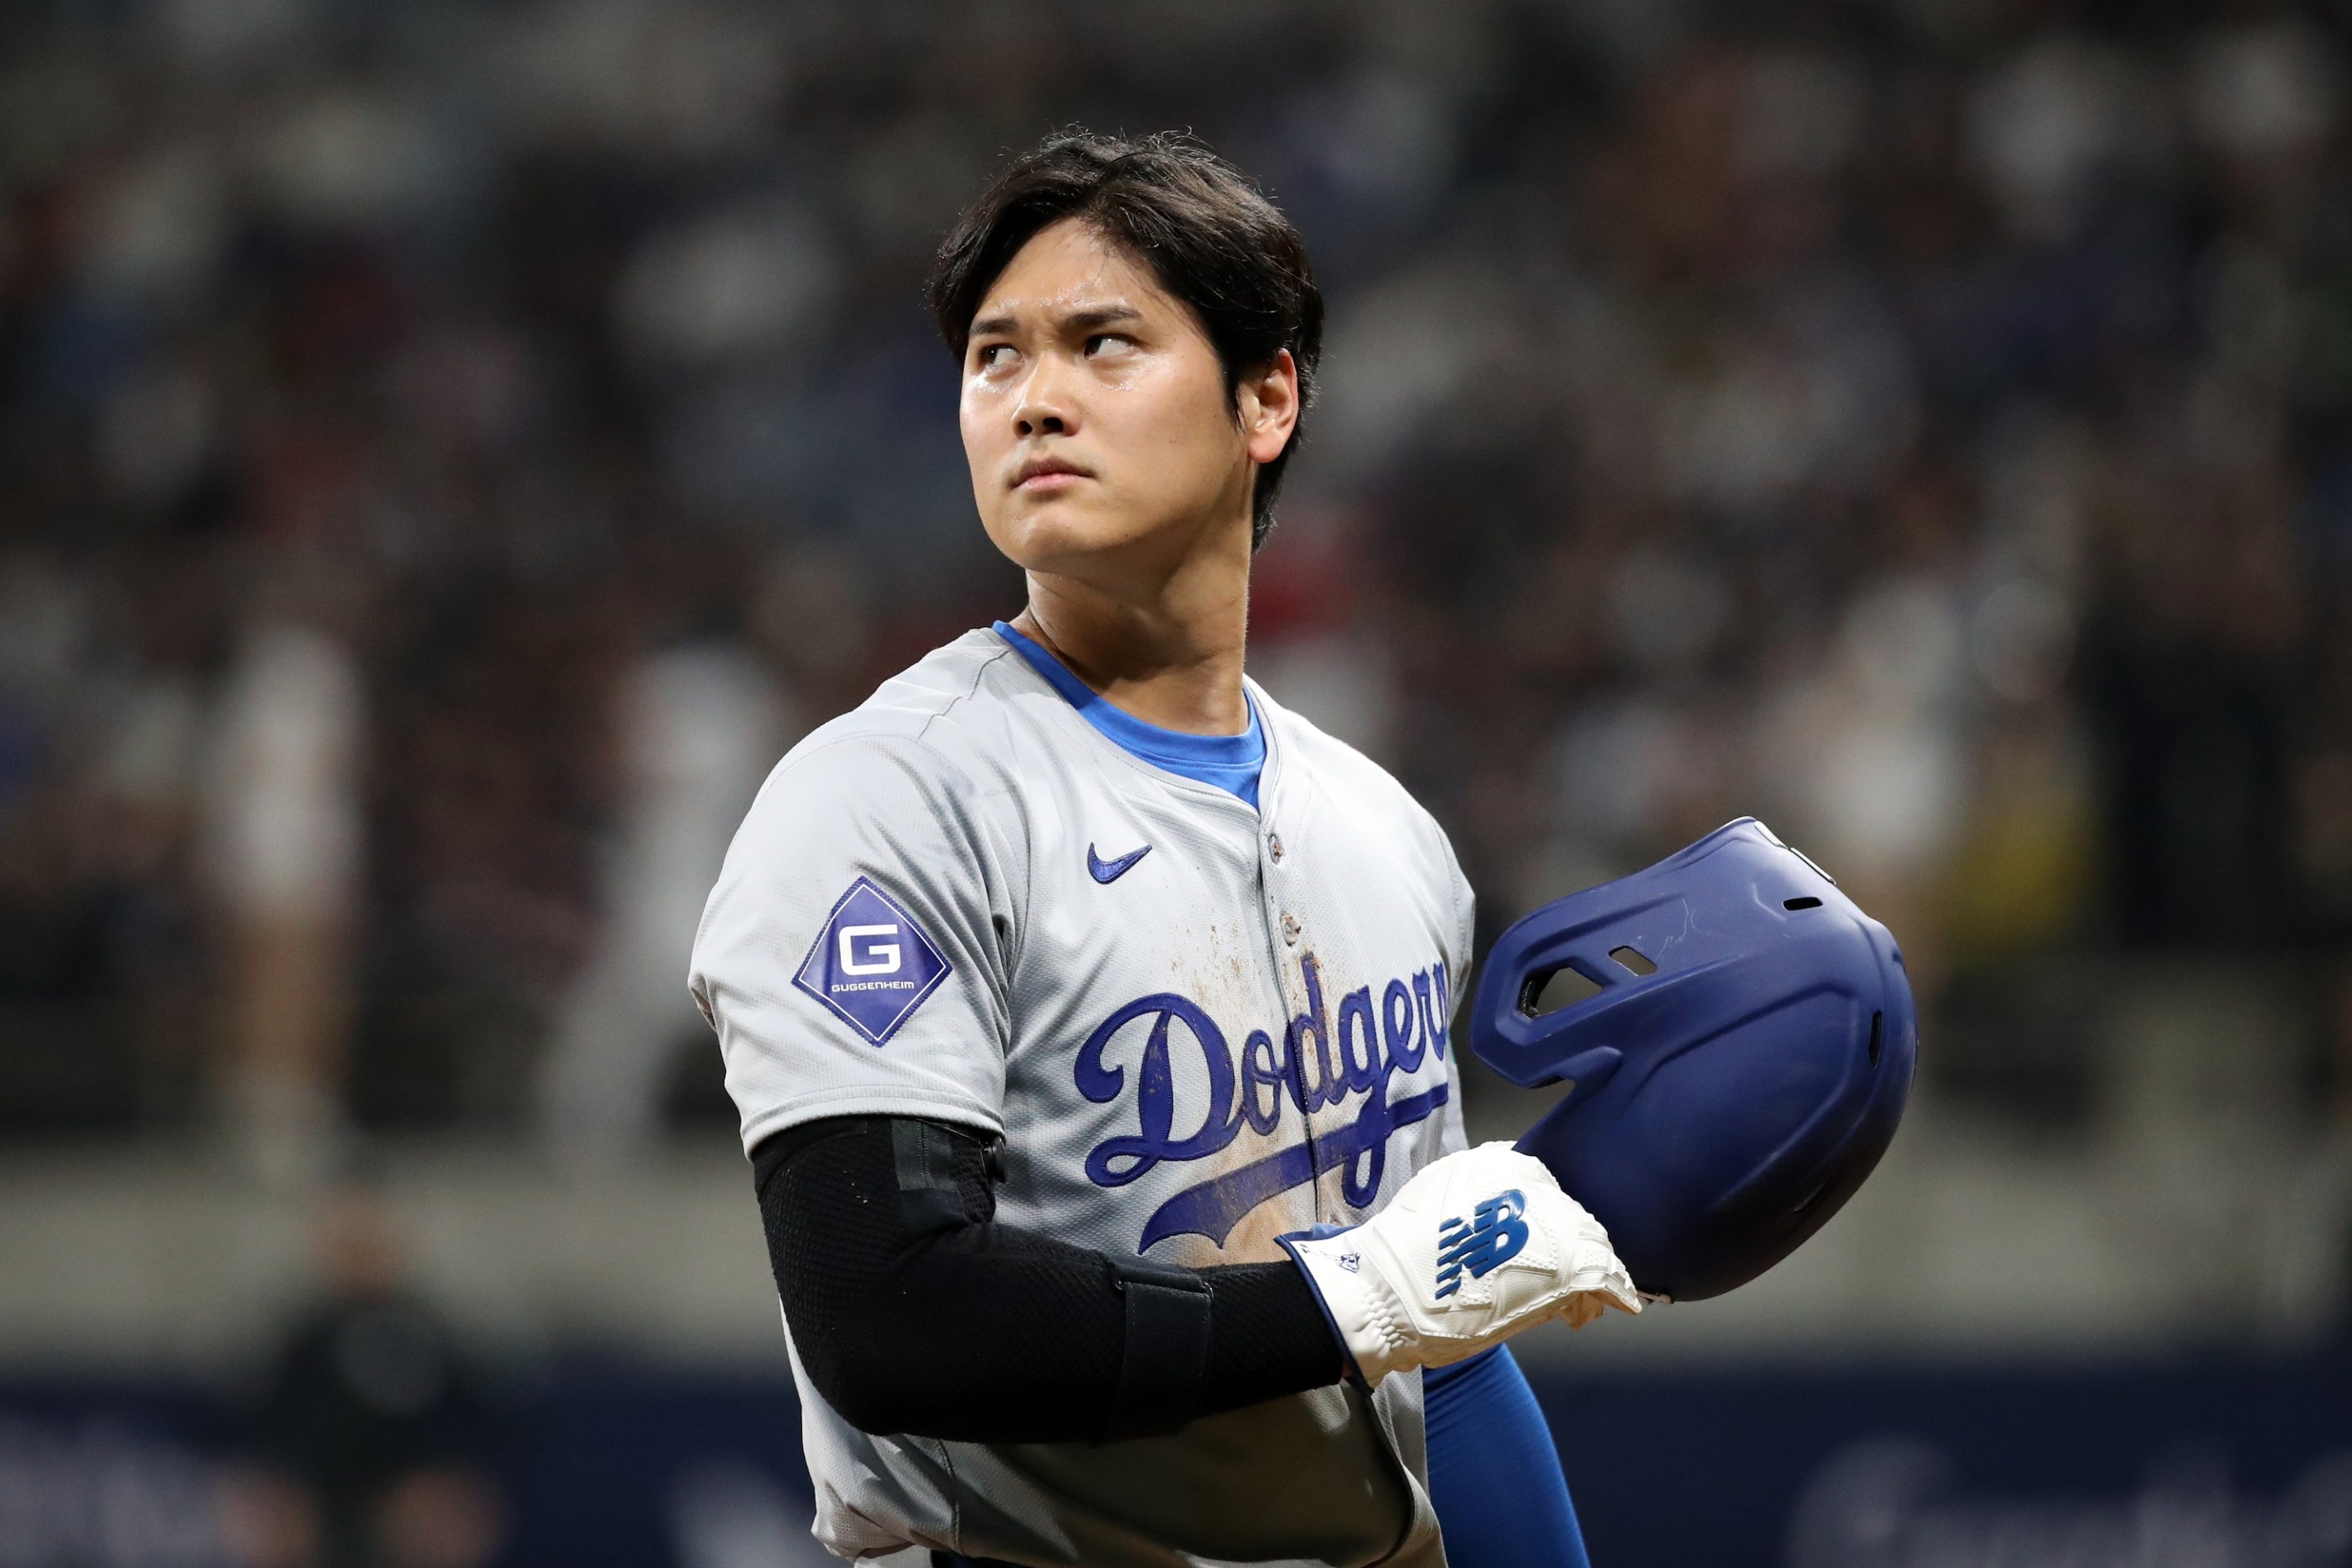 SEOUL, SOUTH KOREA - MARCH 20: Shohei Ohtani #17 of the Los Angeles Dodgers reacts after the 3rd inning during the 2024 Seoul Series game between Los Angeles Dodgers and San Diego Padres at Gocheok Sky Dome on March 20, 2024 in Seoul, South Korea. (Photo by Chung Sung-Jun/Getty Images)